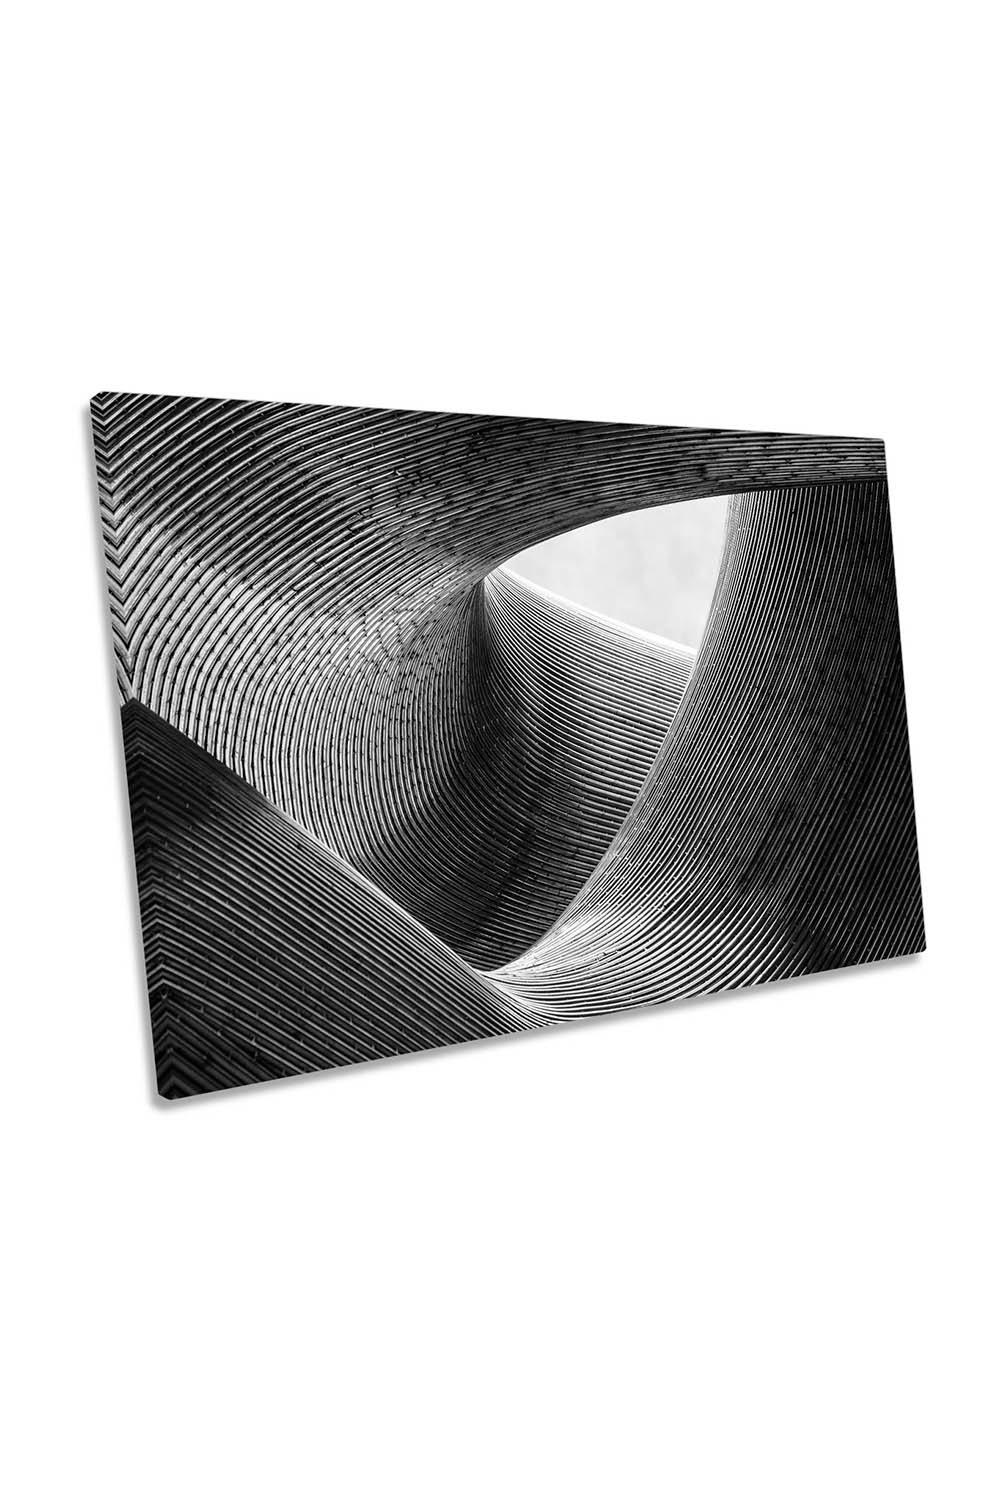 Lines Abstract Curves Bends Canvas Wall Art Picture Print